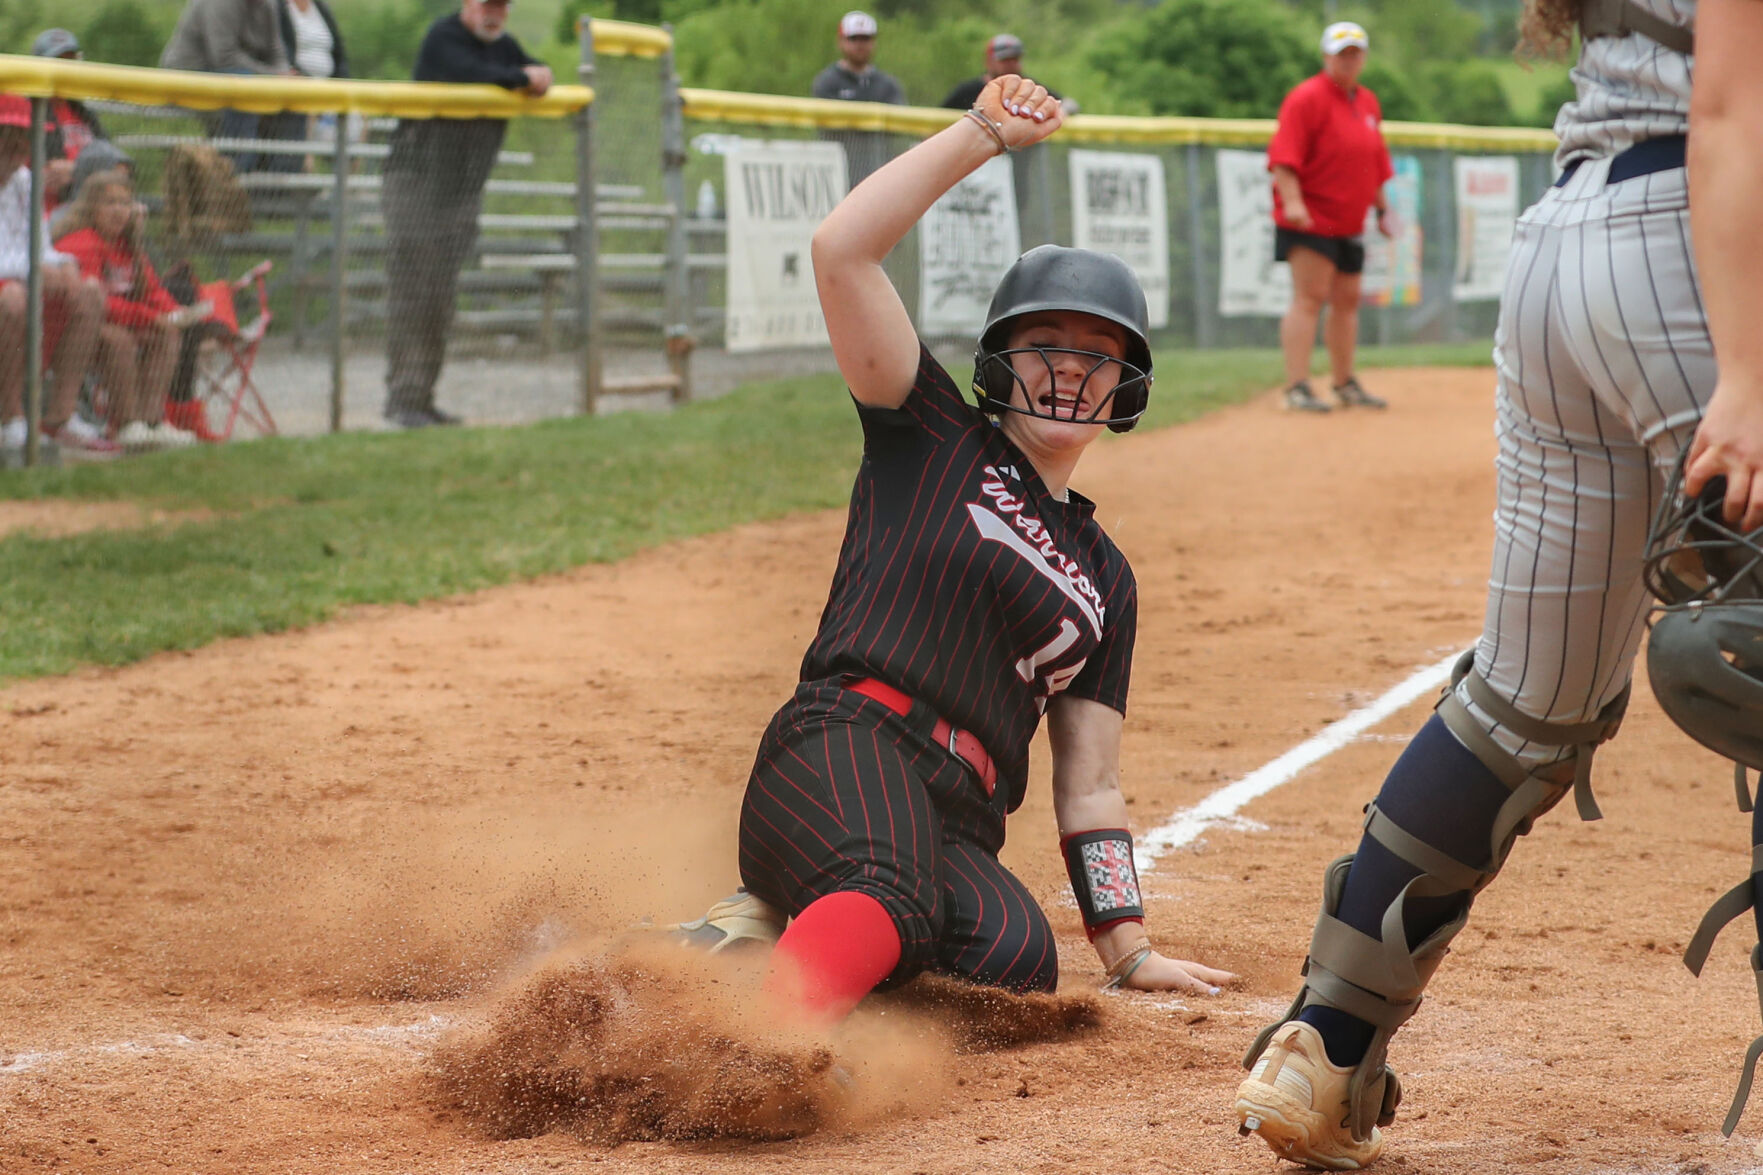 Wise County Central Dominates Softball Semifinal, Kaelyn Dales Shines on the Mound